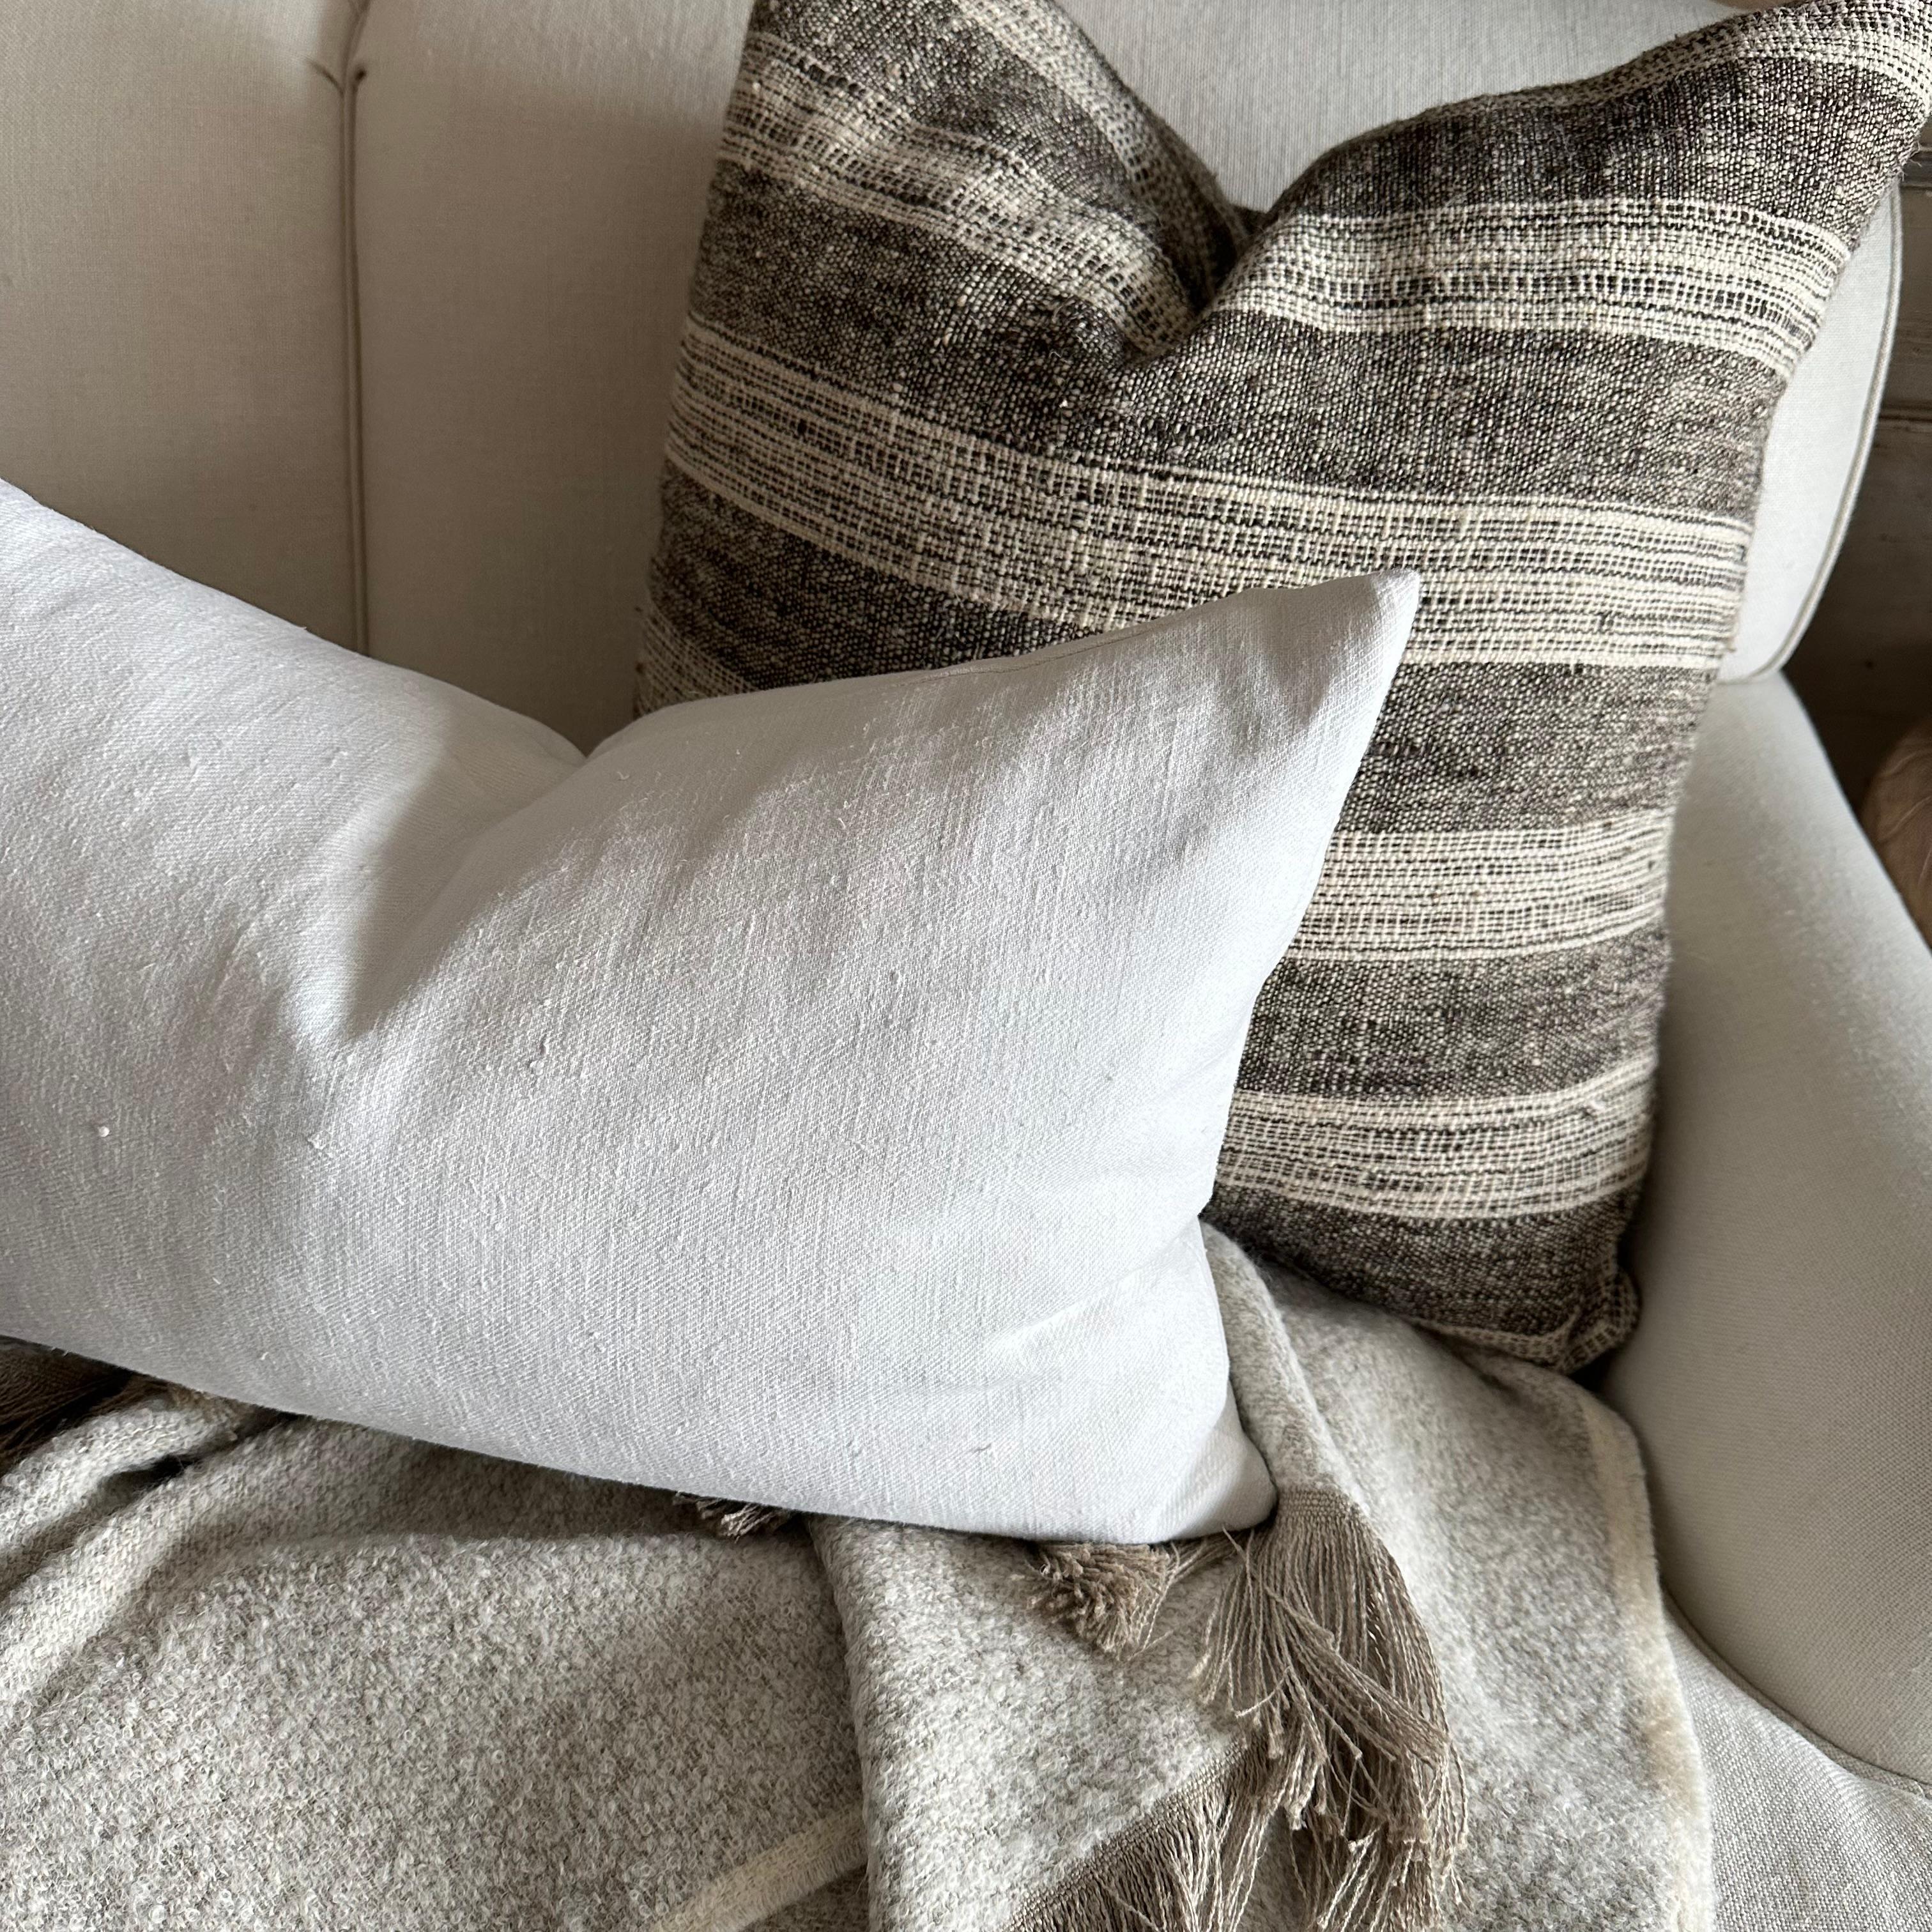 Antique French White Grain Linen Pillow with Insert In New Condition For Sale In Brea, CA